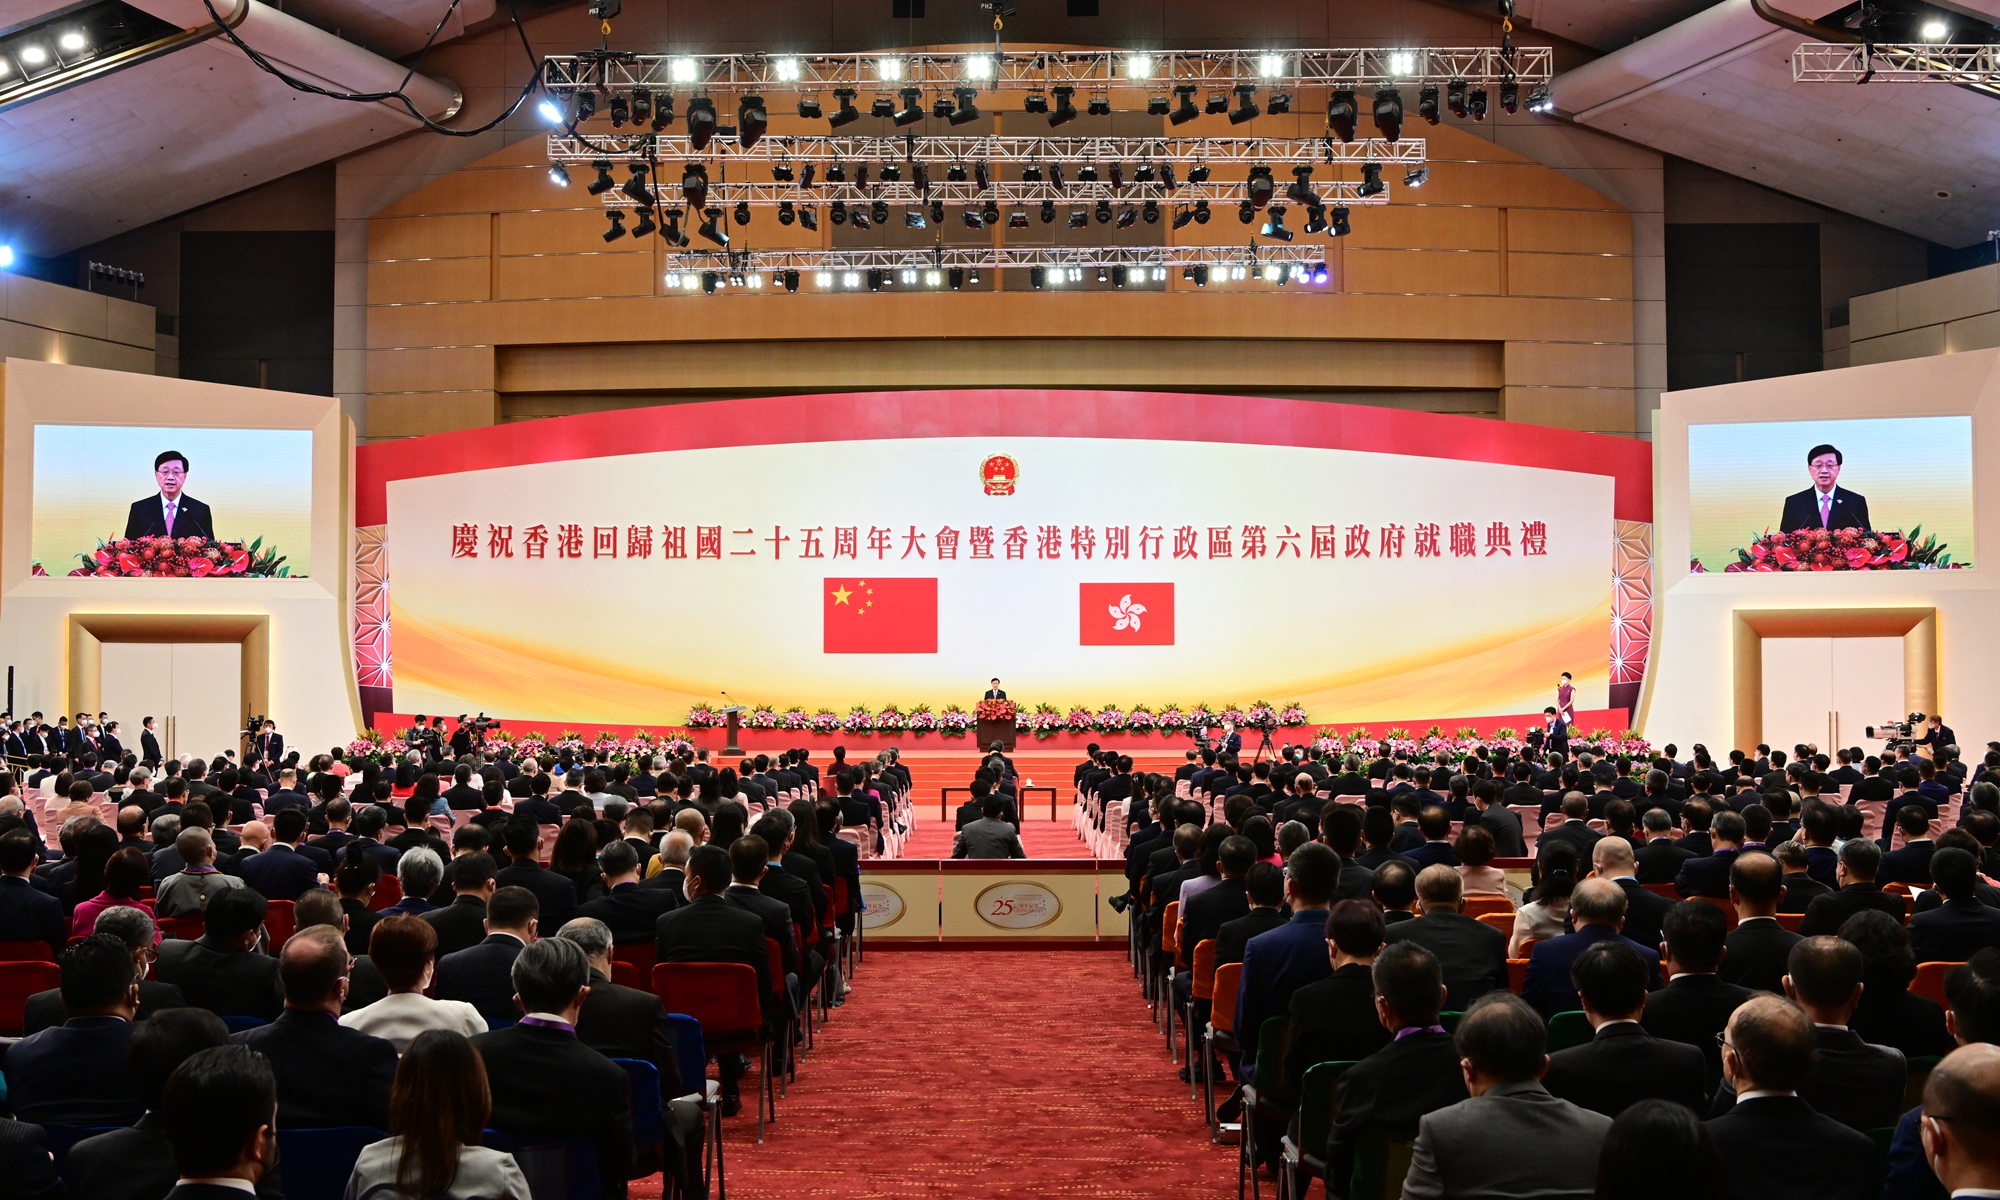 The inaugural ceremony of the sixth-term government of the Hong Kong Special Administrative Region (HKSAR) is held on July 1, 2022. Photo: VCG